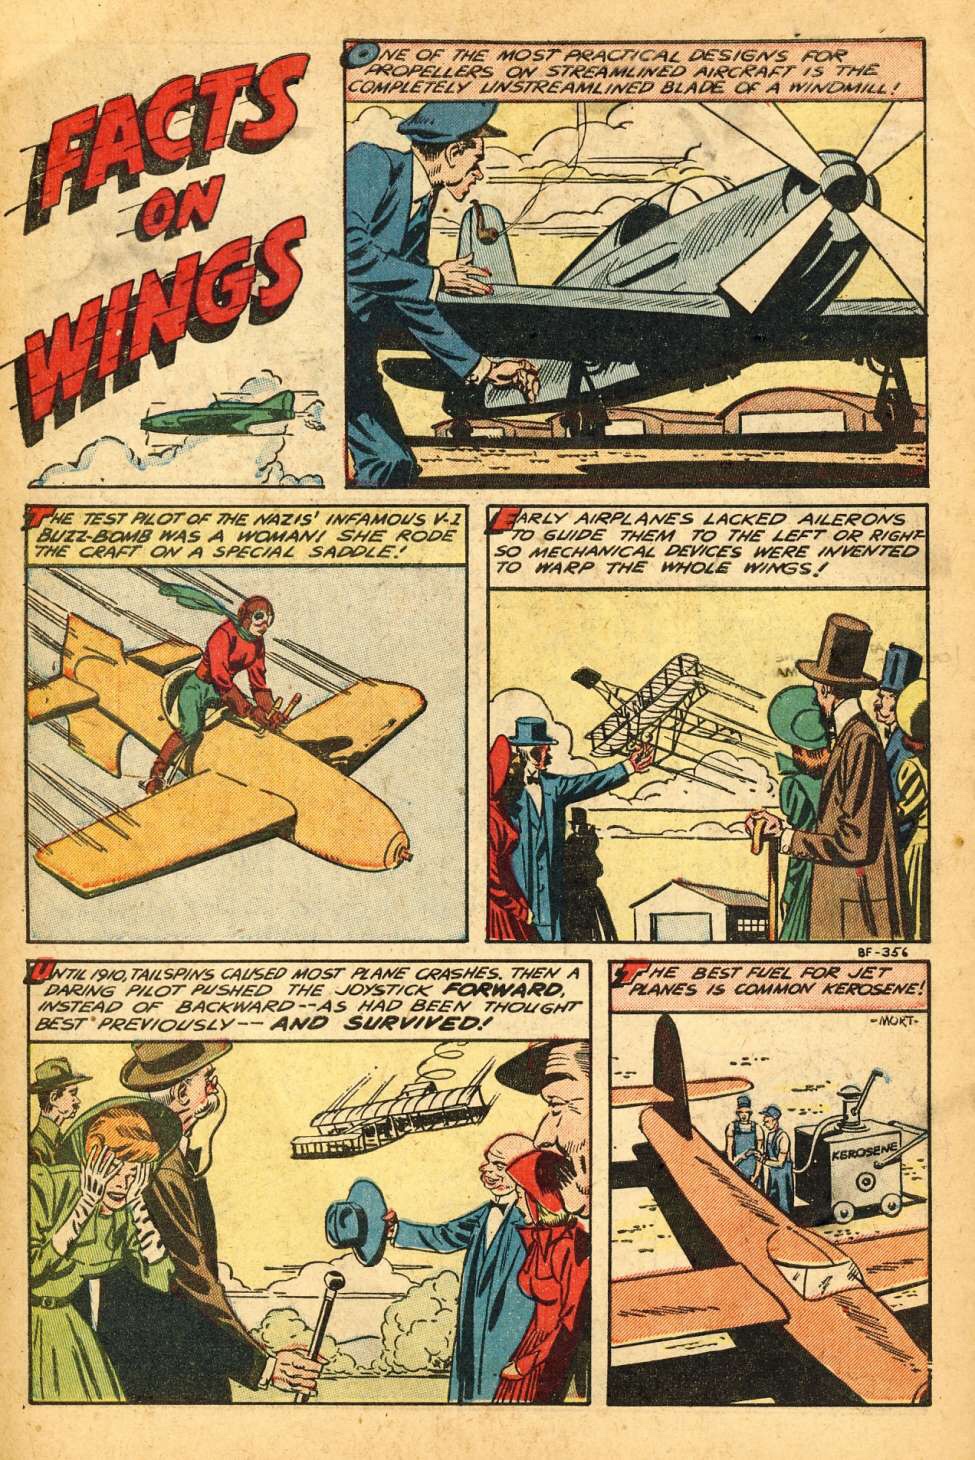 “Facts on Wings” as published in Jet Fighters #7, art by Mort Meskin